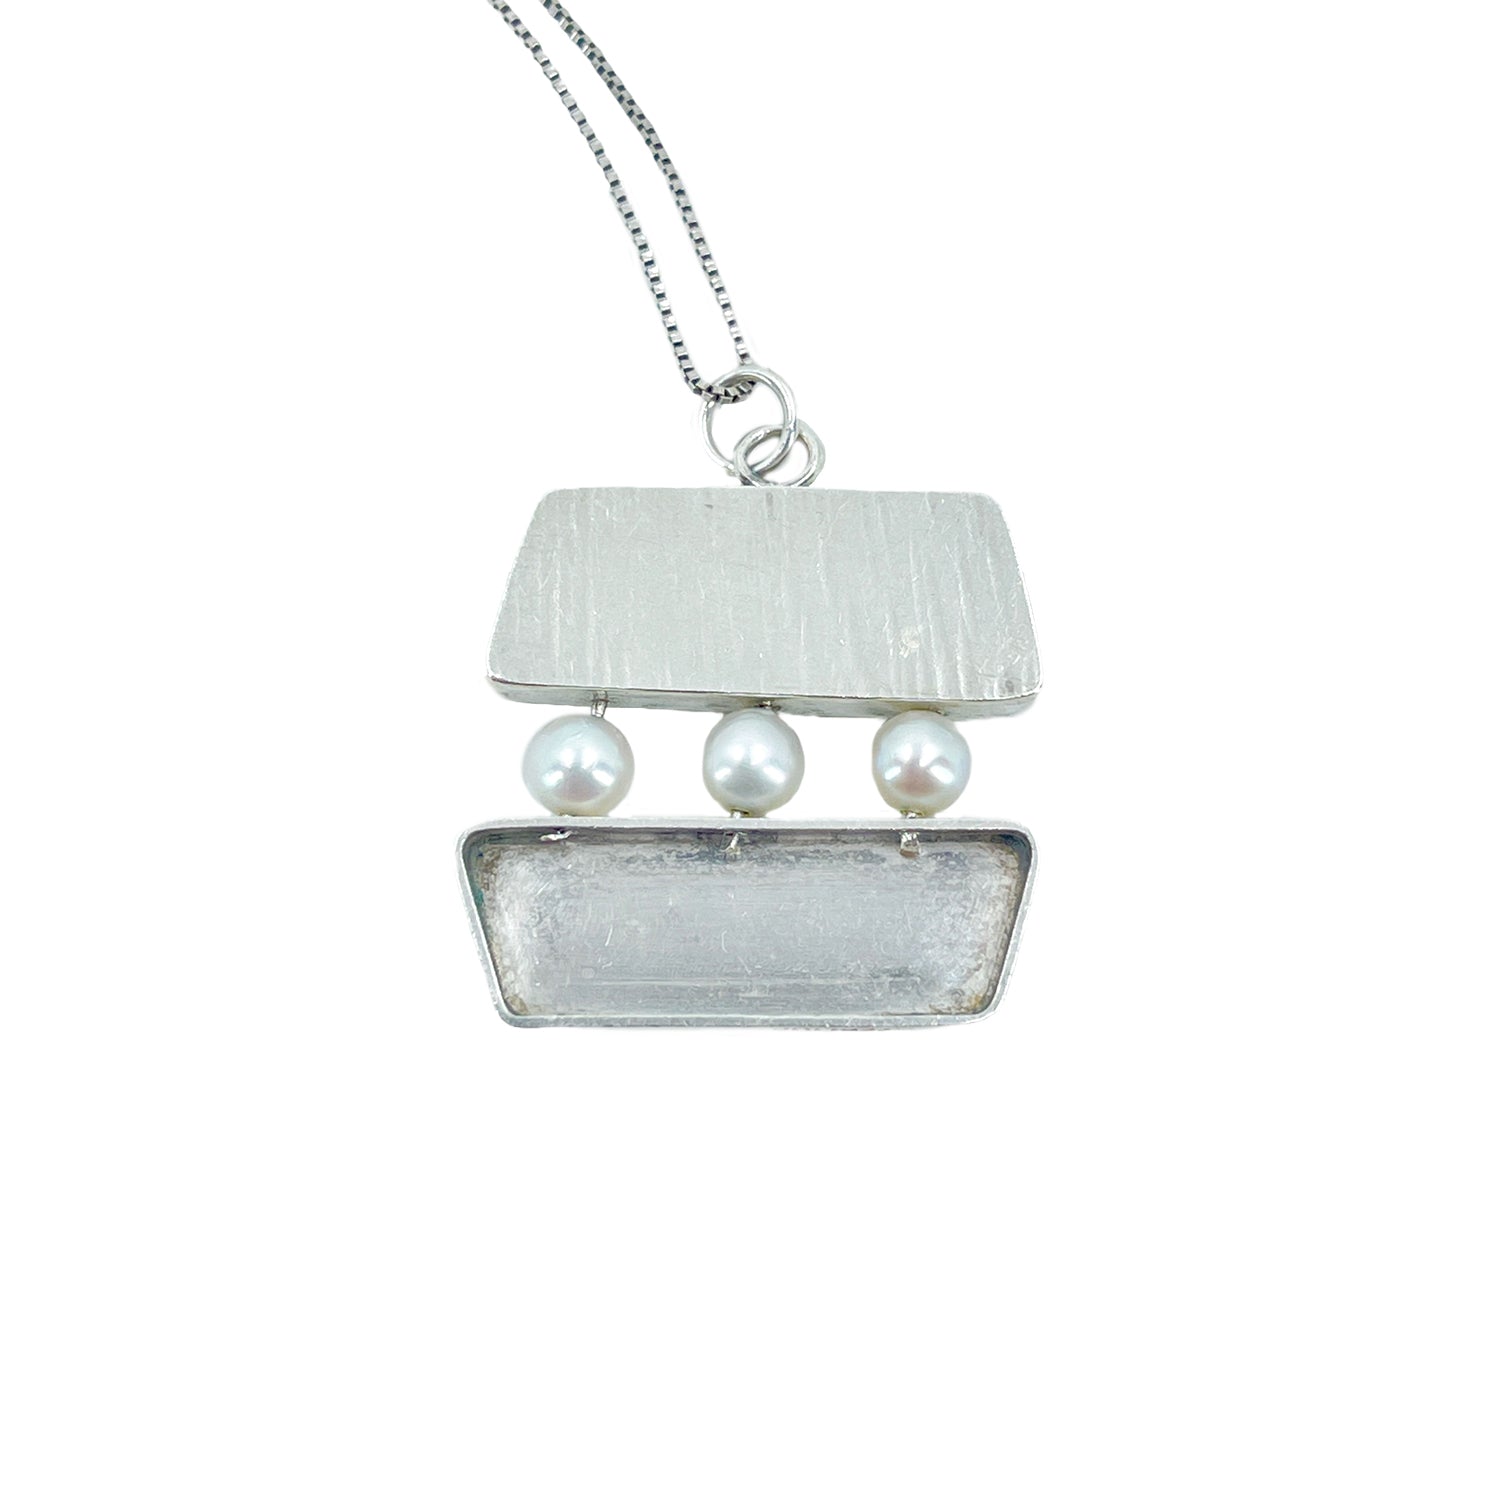 Geometric Modernist Japanese Cultured Akoya Pearl Vintage Pendant Necklace- Sterling Silver 20 Inch